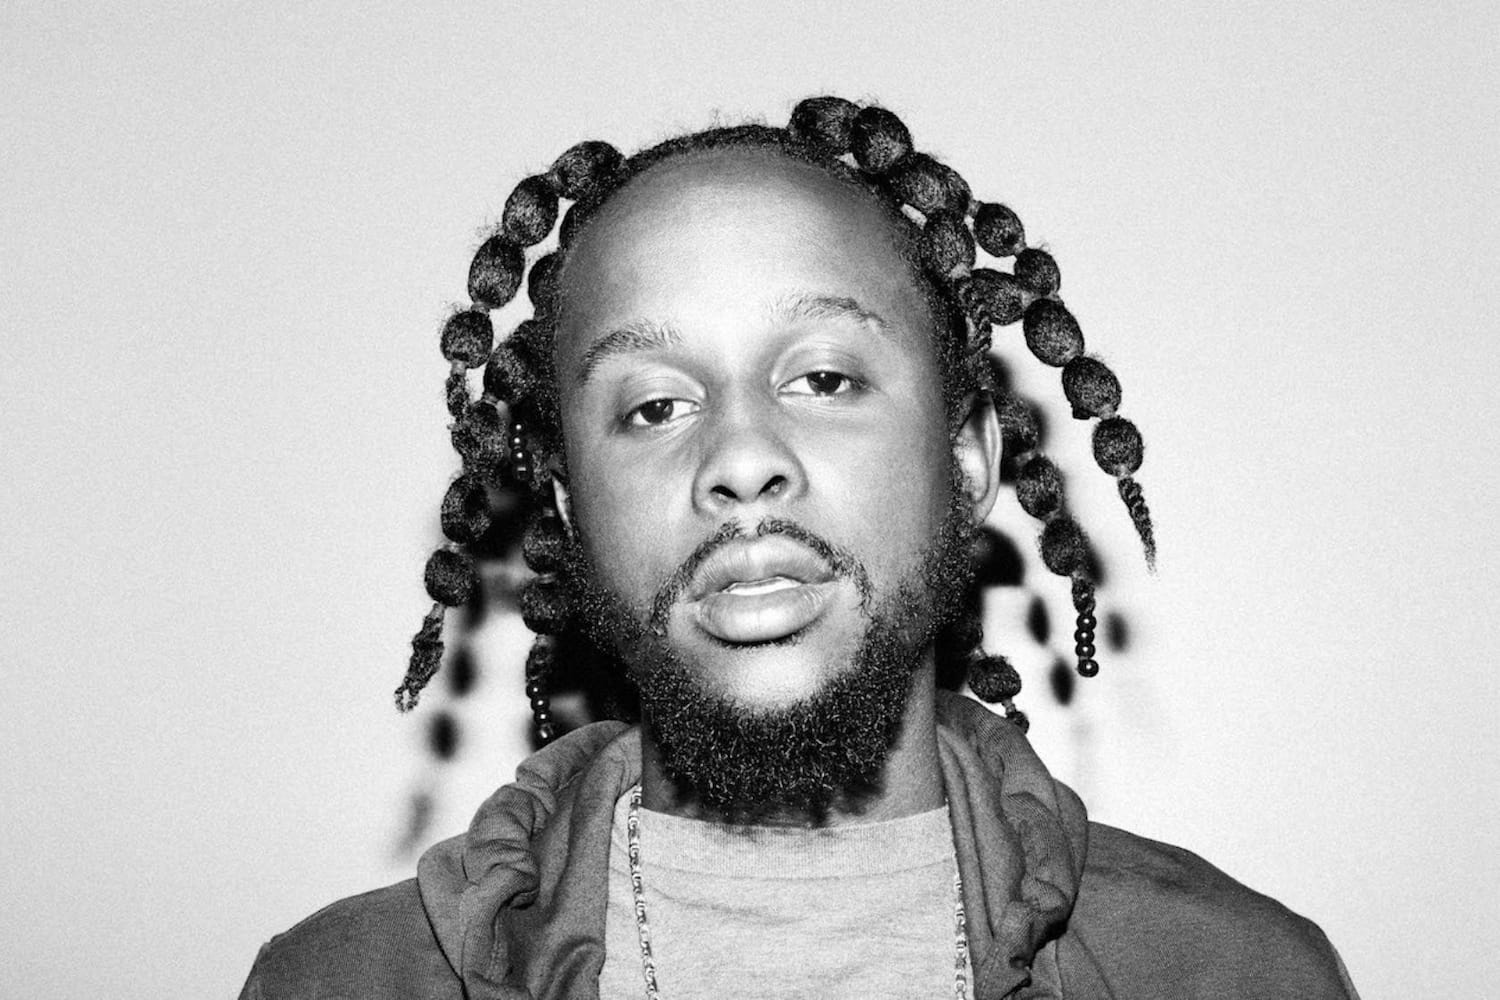 Popcaan best songs: 7 tracks that chart his rise